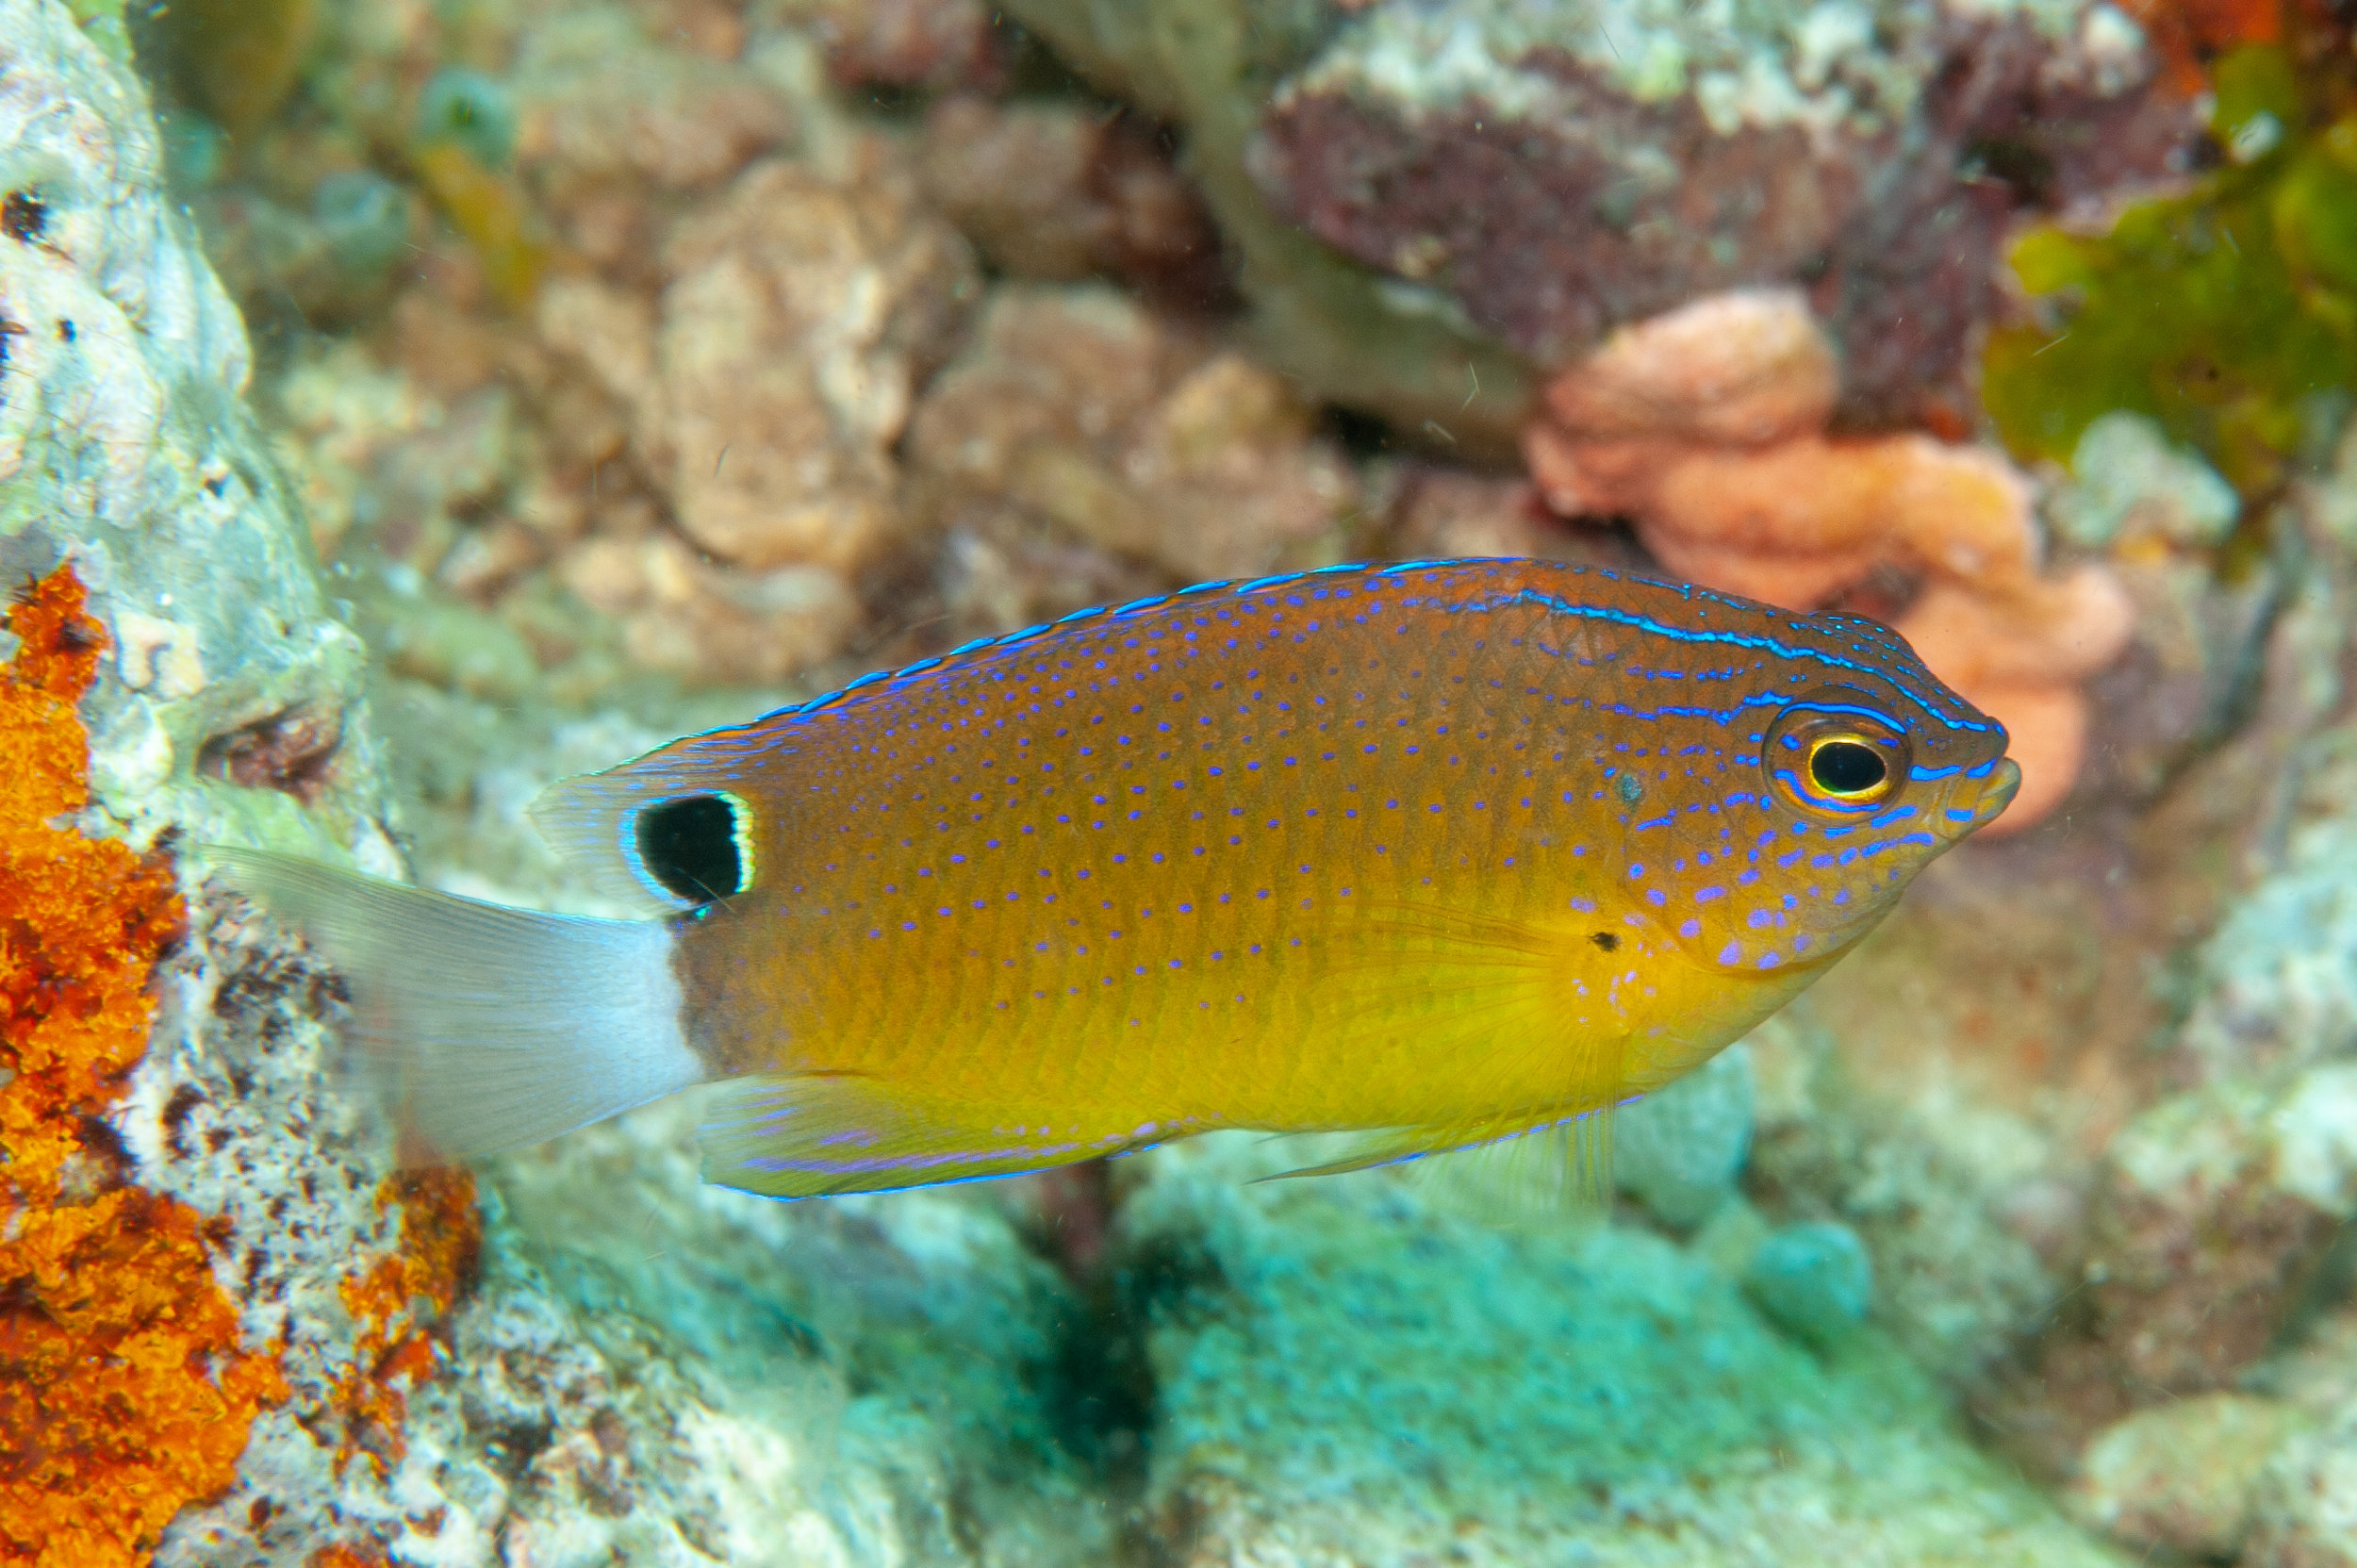 Speckled damsel - Pomacentrus bankanensis, Ake's Reef, Father's Reefs